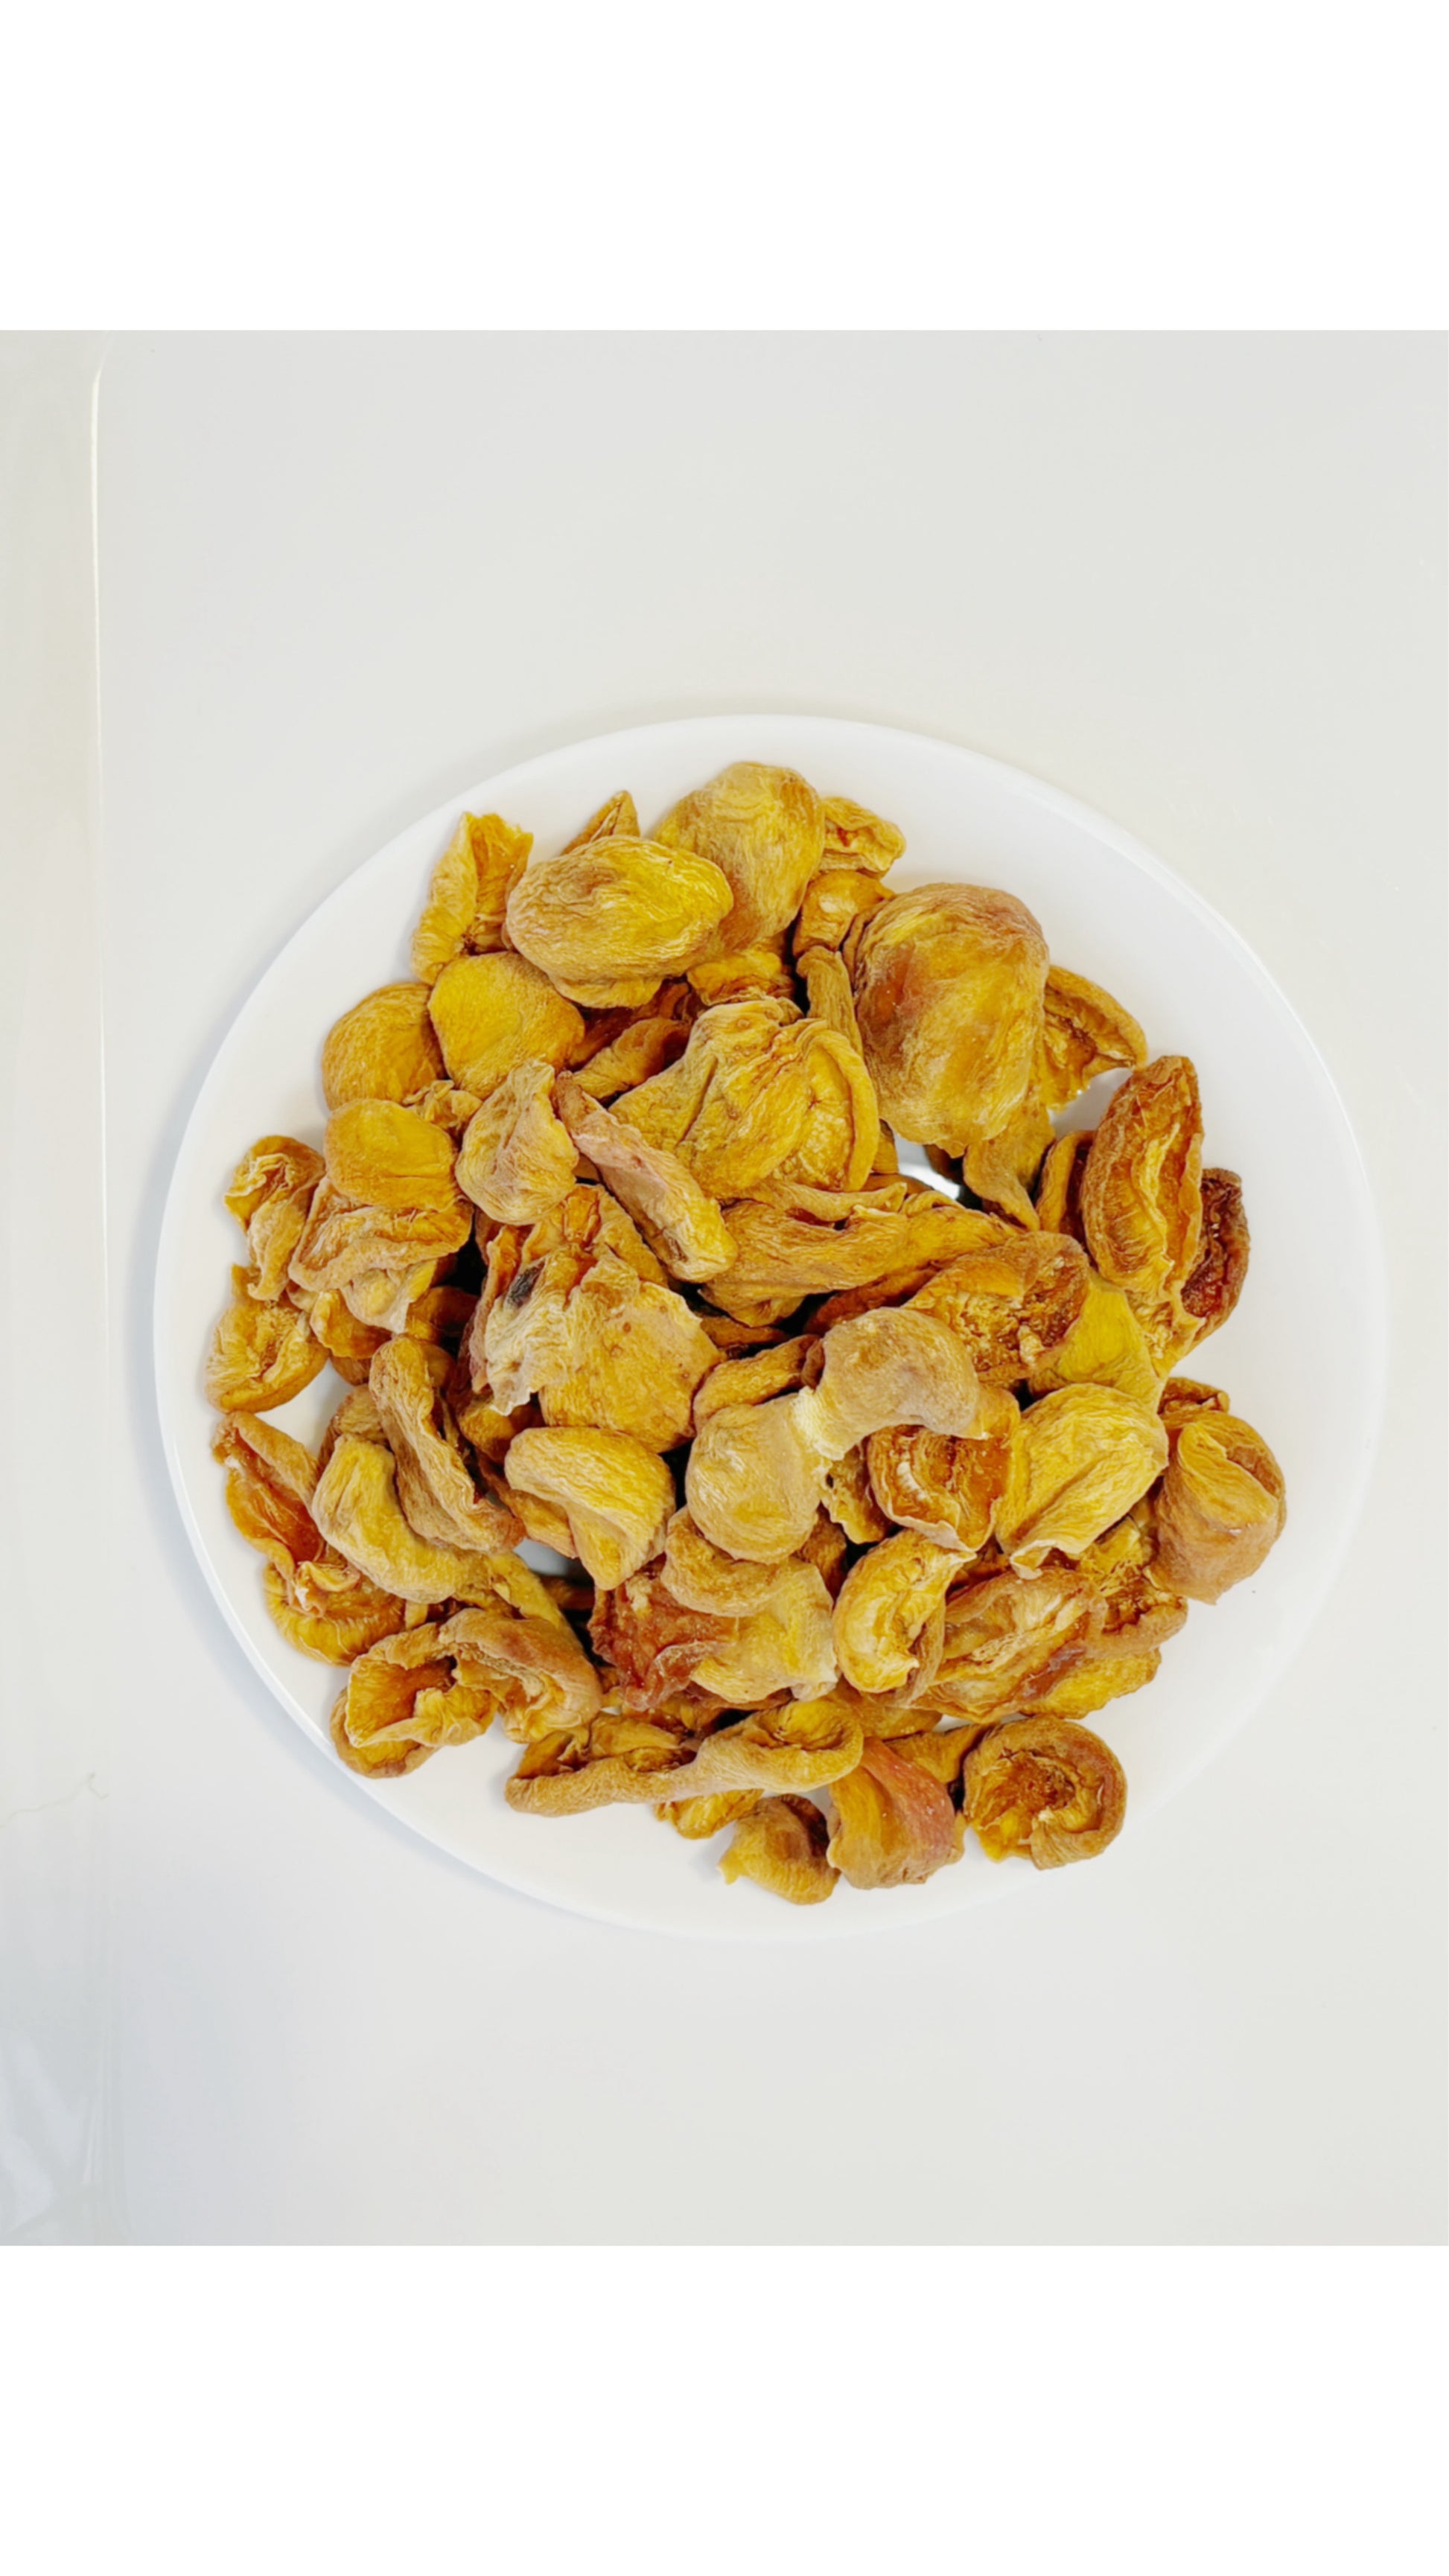 Natural dried apricot, dried fruits in Canada